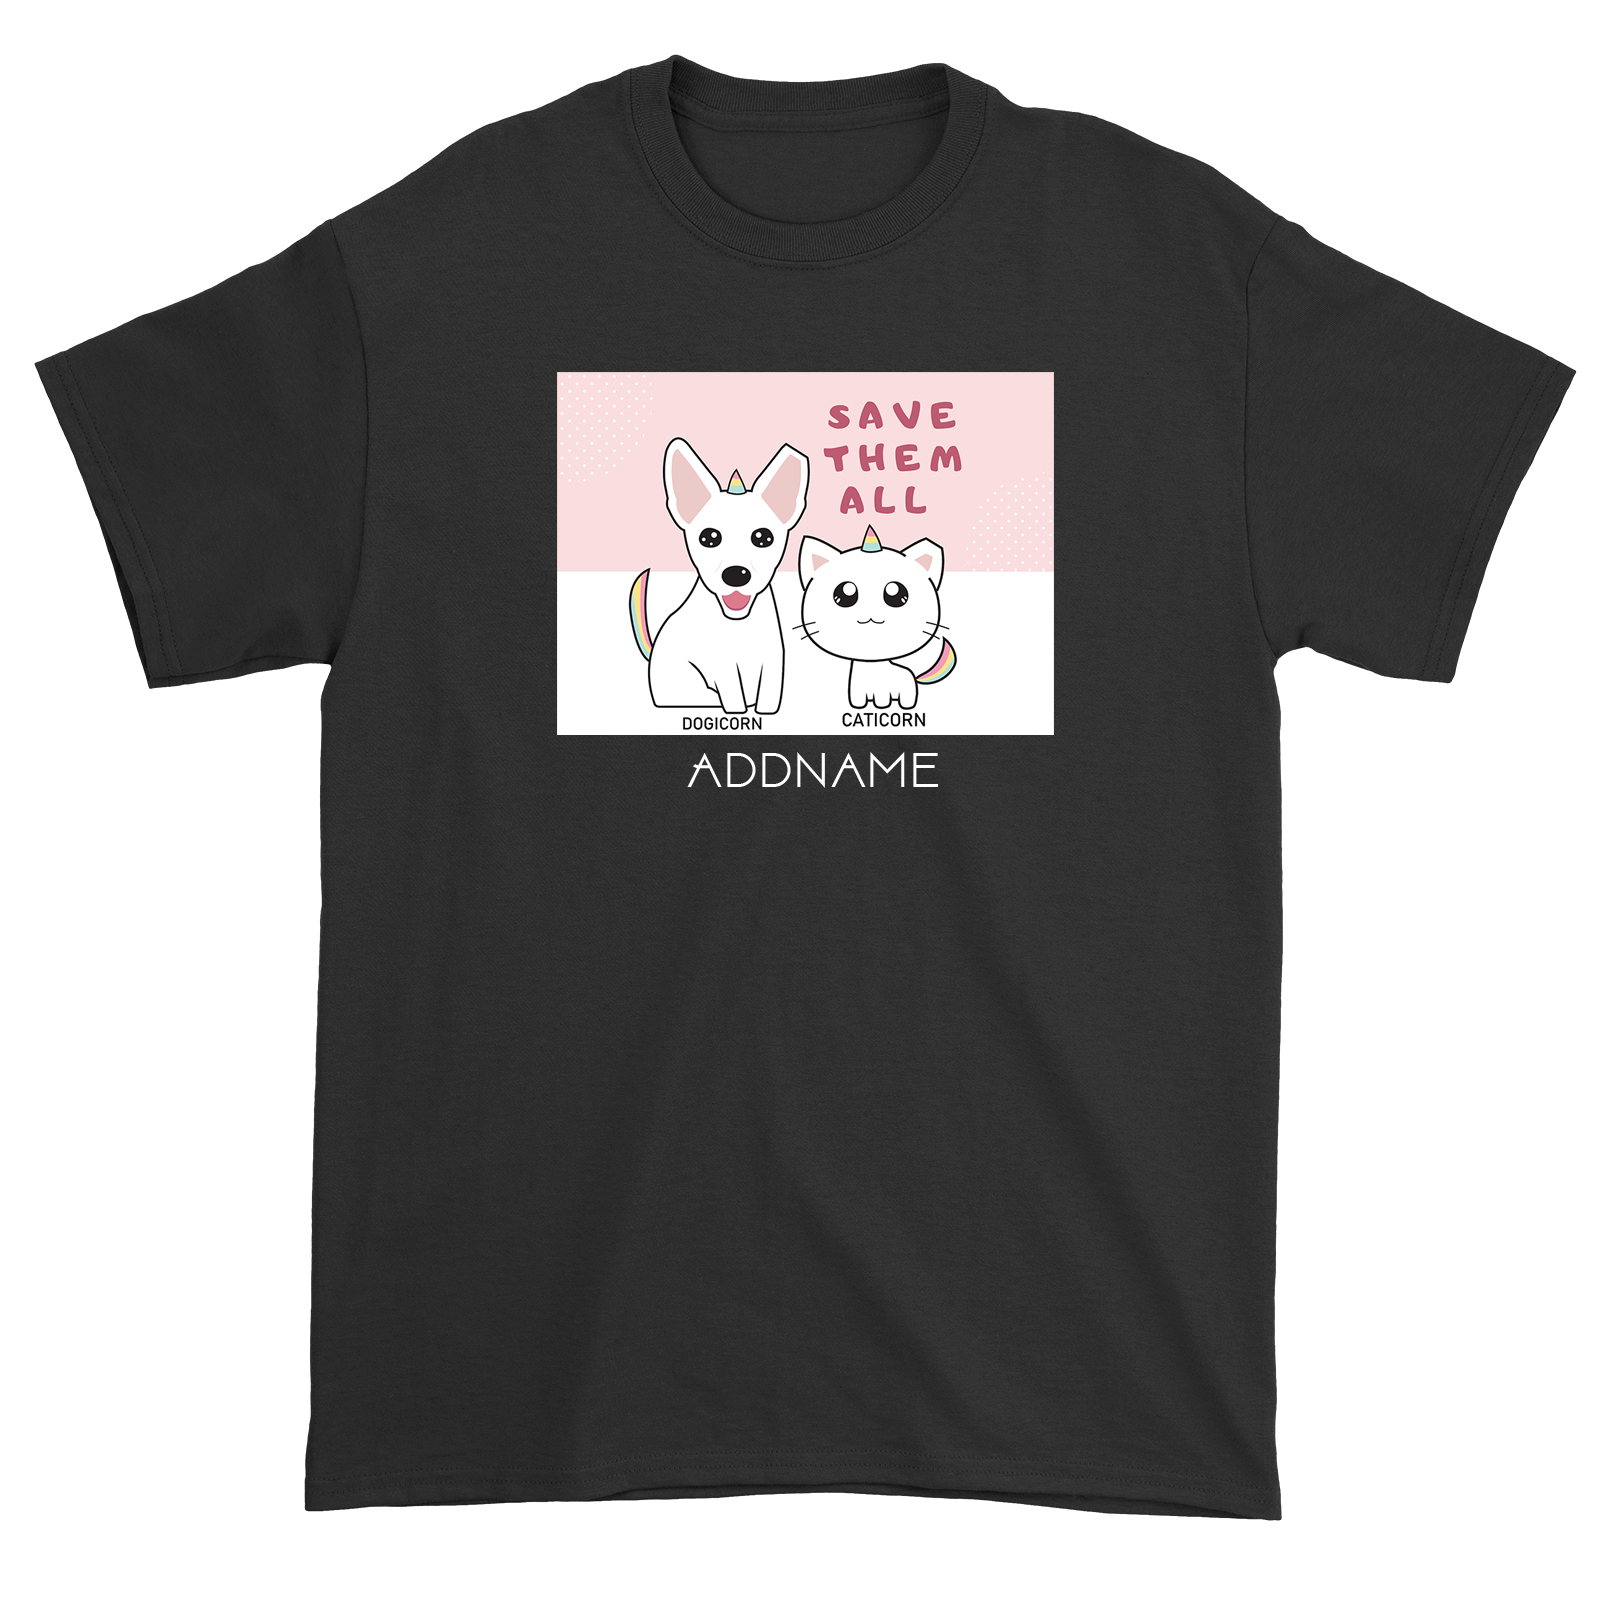 Sherlyn Mama Cute Mix Dogicorn and Caticorn Accessories Addname Unisex T-Shirt